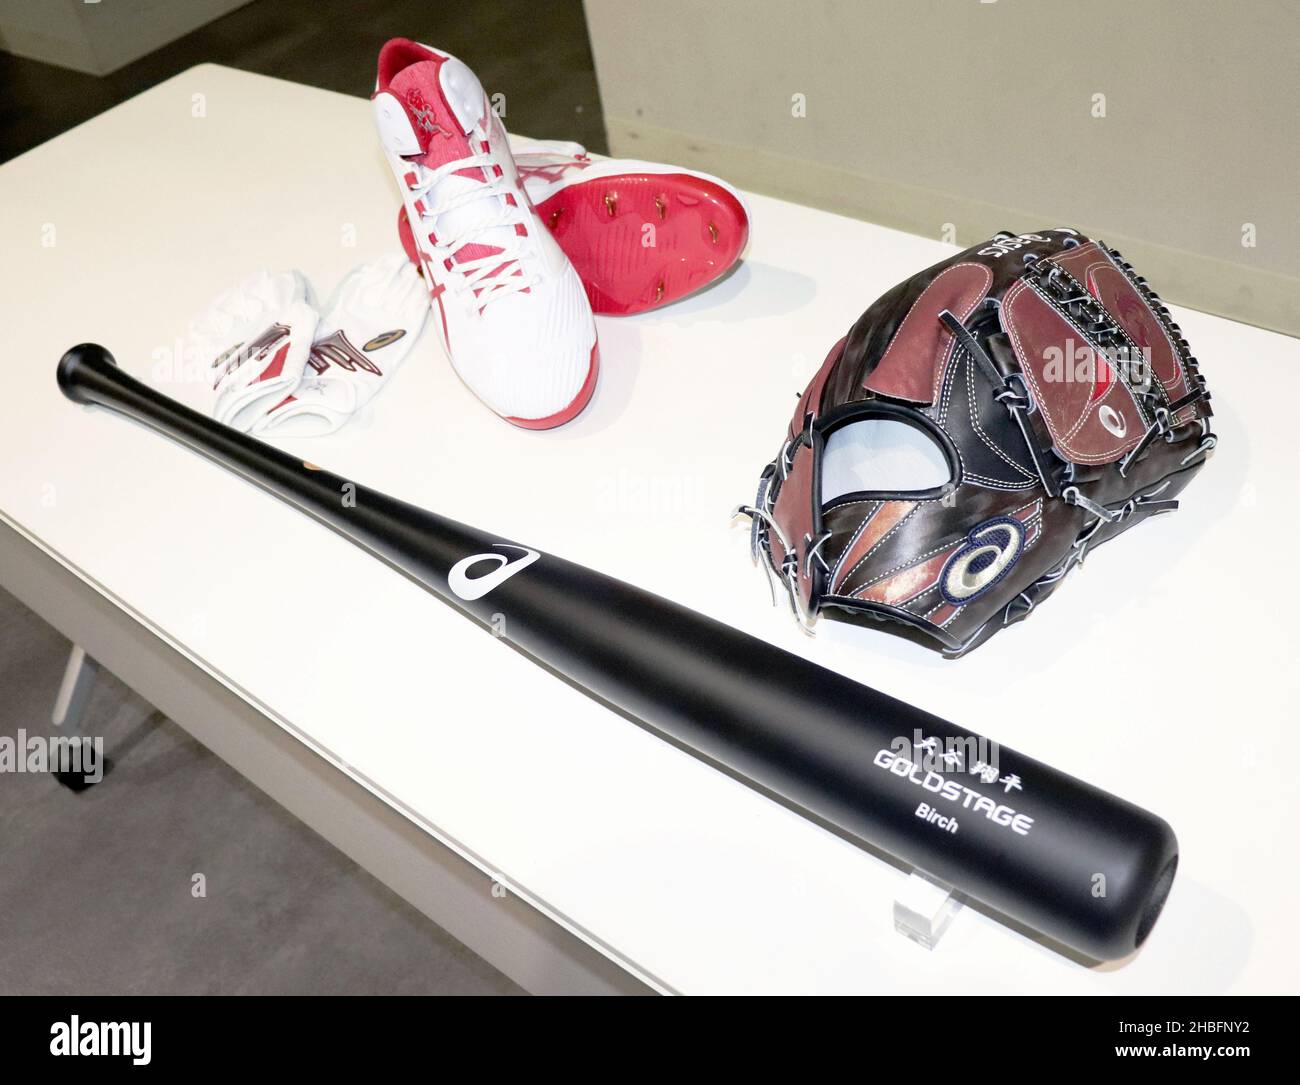 Los Angeles Angels two-way player Shohei Ohtani's Asics baseball equipment  is pictured in Tokyo on Dec. 17, 2021. (Kyodo)==Kyodo Photo via Credit:  Newscom/Alamy Live News Stock Photo - Alamy